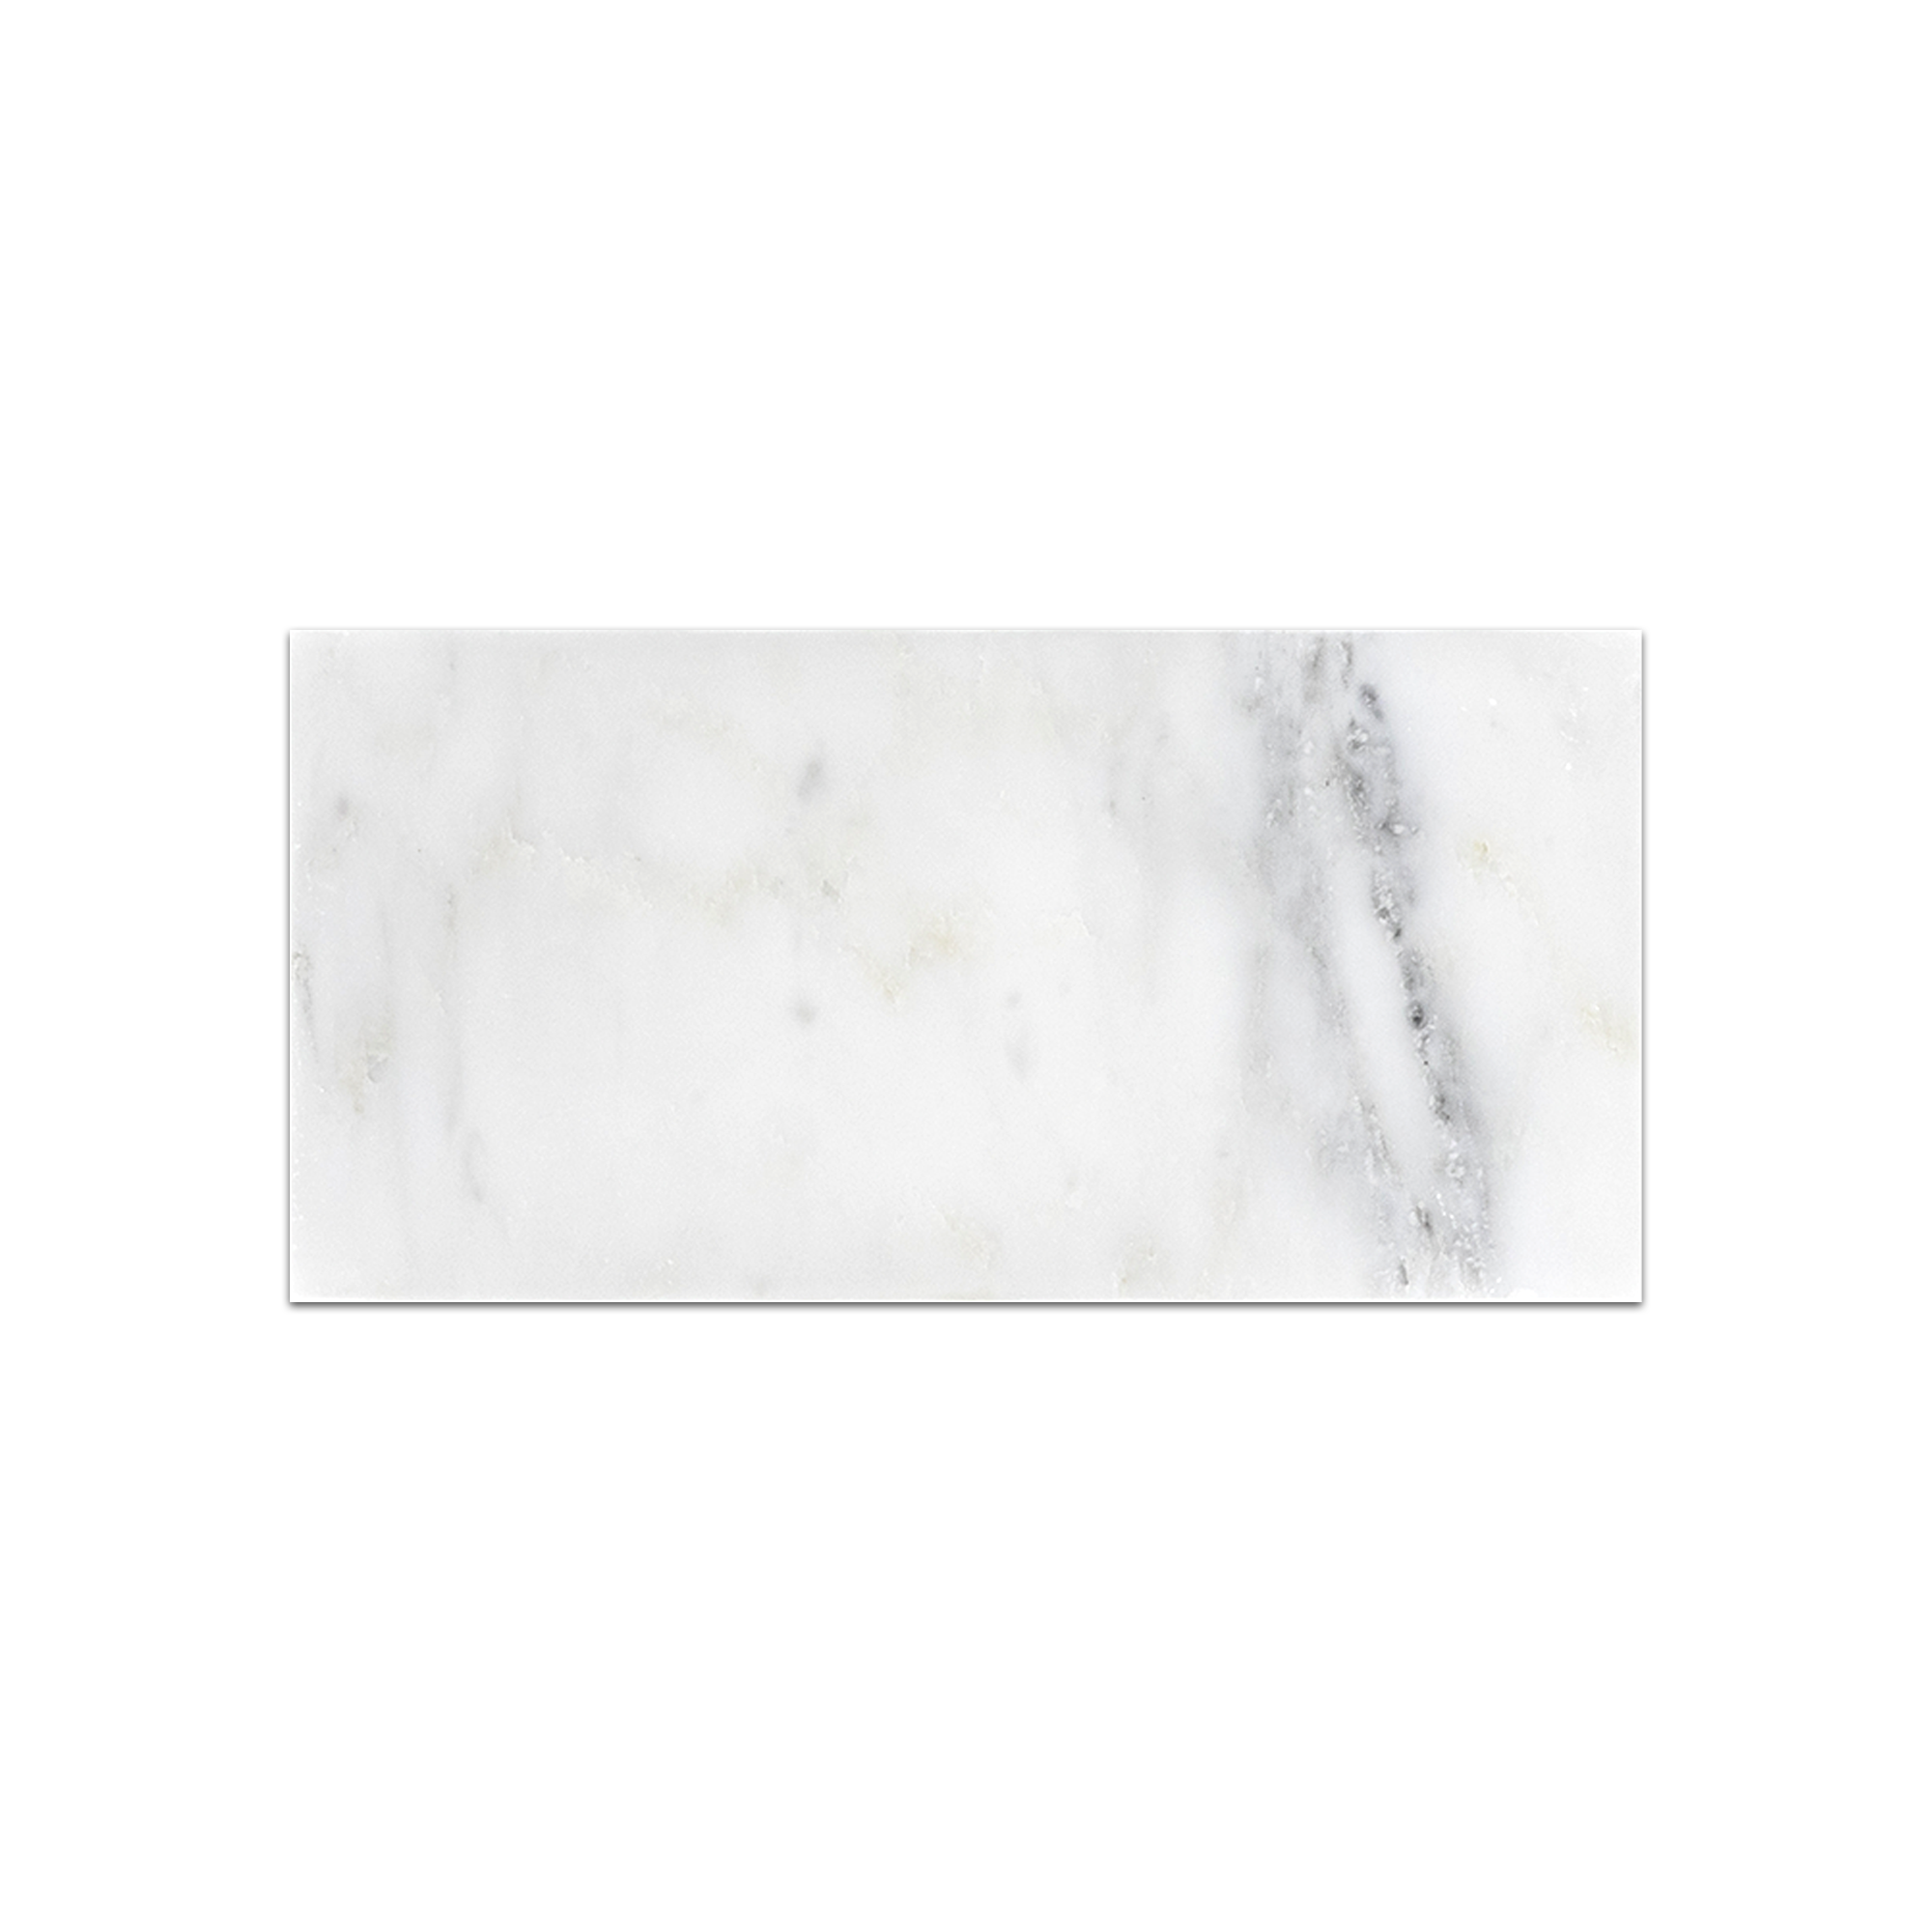 Elon Pearl White Marble Rectangle Field Tile 4x8x0.375 Polished AM8622P Surface Group International Product